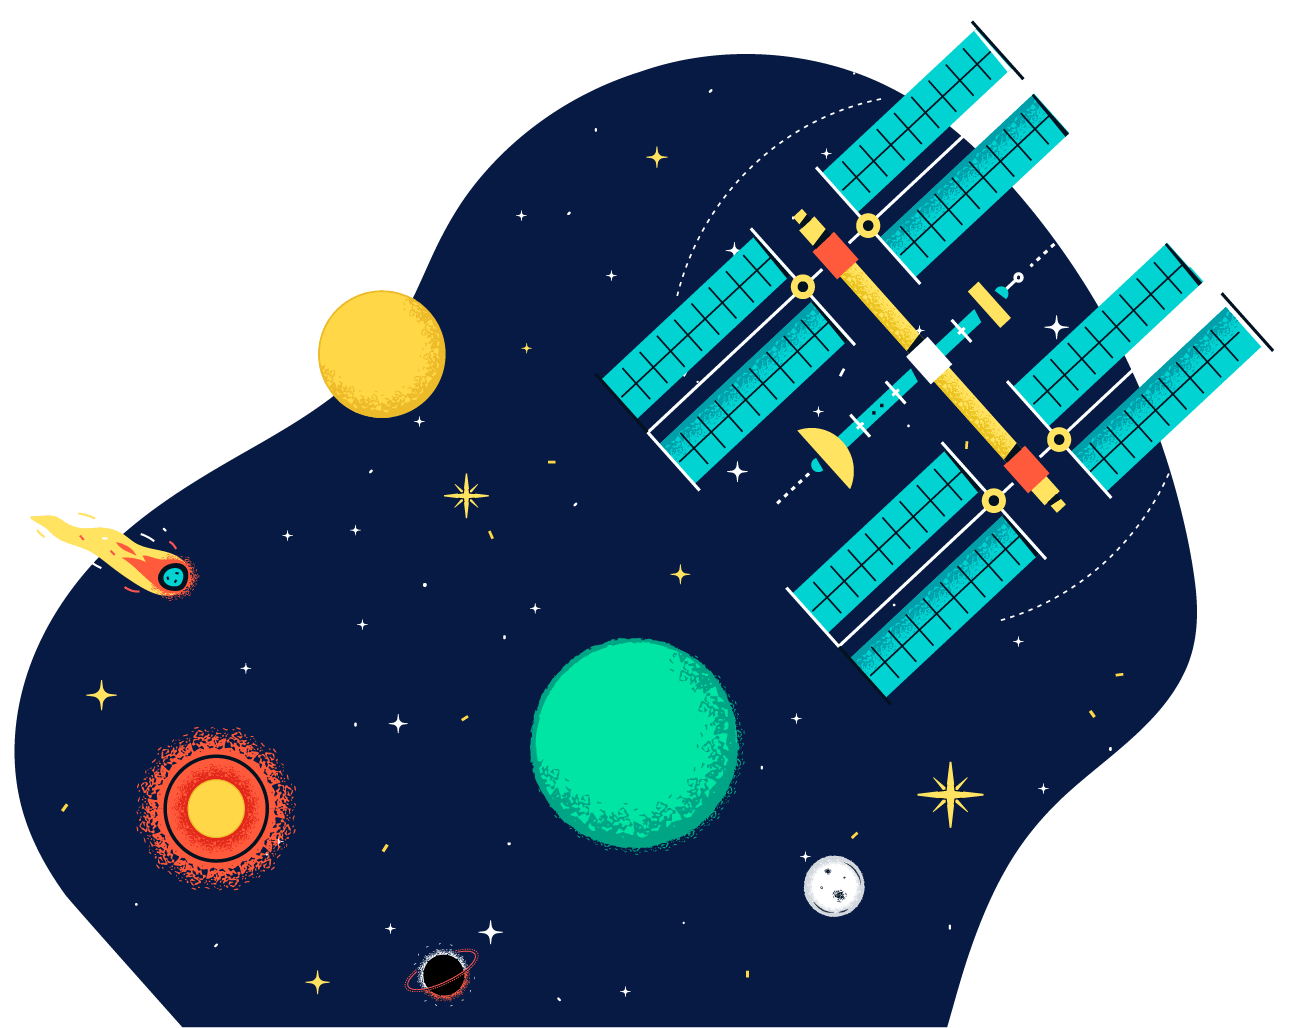 illustrated satellite in space with planets, stars, and asteroid